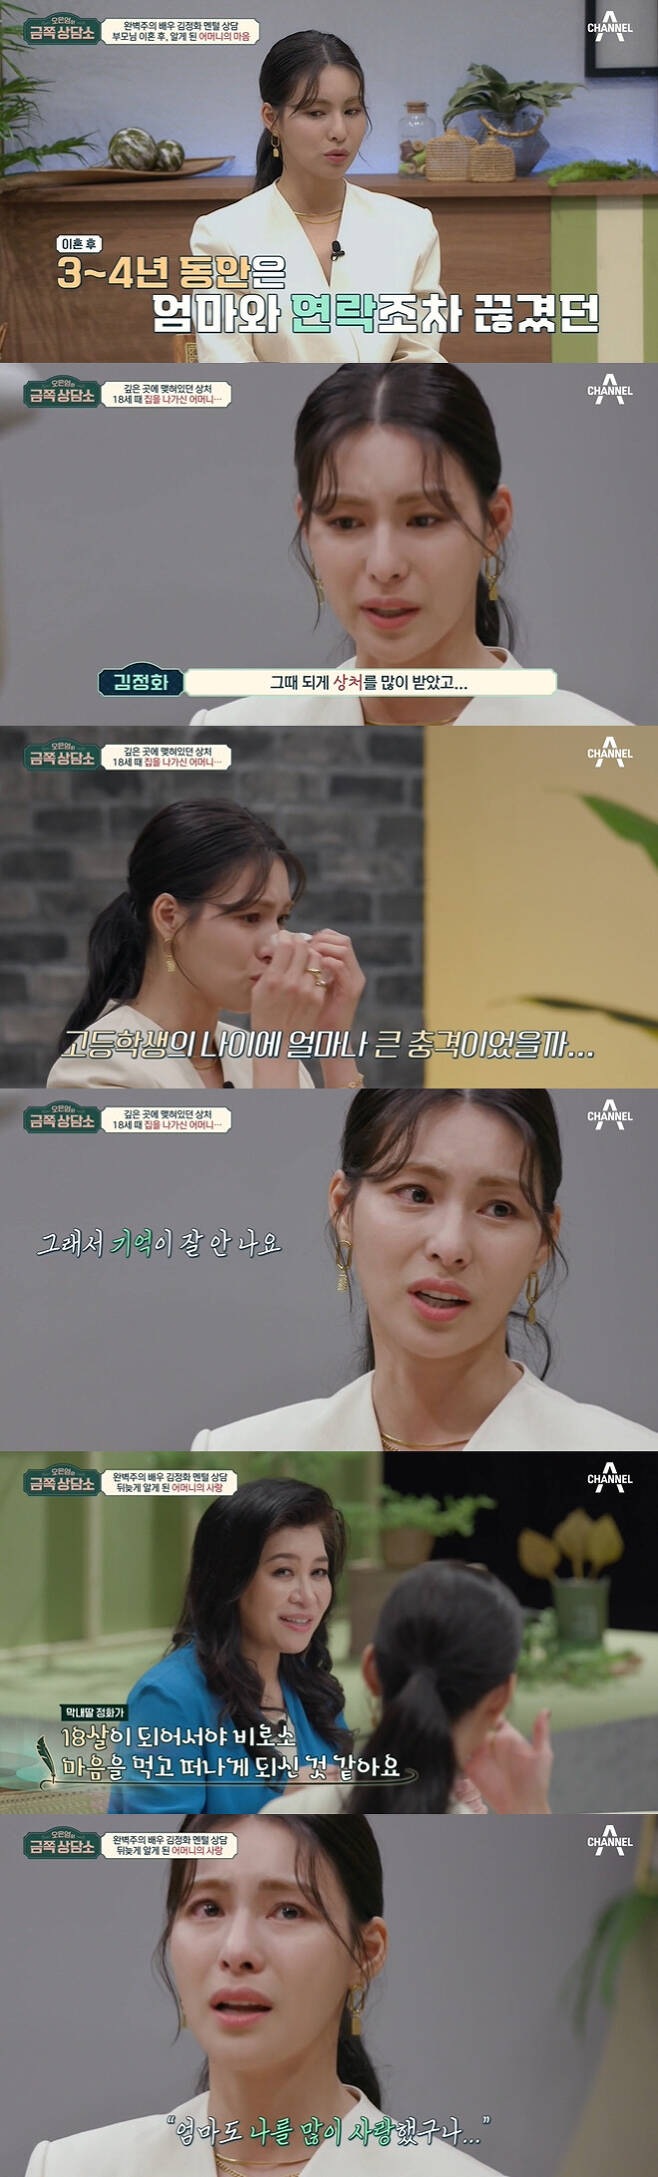 Actor Kim Jung-hwa has been healed from a long-standing wound.Channel A Oh Eun-youngs Gold Counseling Center, which was broadcast on the 19th, featured actor Kim Jung-hwa, a 22-year-old actress who transformed from a high-teen star to a new styler in the 2000s.Kim Jung-hwa made his debut at the age of 18 and told about the story of having to jump into a harsh livelihood and the slump he had during his prime.Also, Confessions were made to the parents divorce and the long battle of cancer of the deceased Mother.Kim Jung-hwa, who had a slump in his fifth year of debut, said, I was sick because Mother had cancer by the time I had Sigi to find my life.I did chemotherapy, but when I went to the test at dawn, I always went to pick me up. I thought it was a daughter, so I thought it was possible. At almost the last time, there was a time when Mother was not good enough.At that time, I had finished reading the new work, but I am really sorry that I had to move to the hospice right away, but I gave up the work that finished reading.I thought I had to be with my mother at that time. Kim Jung-hwa, who happened to make his debut as an Actor through street casting at the age of 18.I think I was lucky, but I thought I worked like a machine, not starting to plan and what direction to go.At first, it was strange and funny, but after four to five years, it was very difficult. There was no friend who could share my mind only by seeing me as an entertainer.When I was asked in an interview at the time of my activity, I did not know anything about me, so I lived without knowing what I was happy about. Kim Jung-hwa later decided to have his own time, but Mother had a hard time starting his battle.I wanted to see everything making me feel tough.In those days, there is no bright content such as I do not want to open my eyes tomorrow if I close my eyes tonight and I want to disappear immediately.I even wanted to die, he said. I went to the hospital and was tested. I was actually diagnosed with depression, and I took medicine, and I was insomnia.I do not think Sigi, who was the hardest in my life, was Sigi, who seemed gorgeous and good when others saw it. Kim Jung-hwa told the show of her childhood pain she had never spoken to anywhere, saying: My parents had a lot of quarrels when I was a kid.My sister wandered and it was the cause of the fight, so my parents fought more.So I thought that I did not want to be a cause of the fight, he said.But my parents eventually gave Kim Jung-hwa a divorce in high school, and Kim Jung-hwa stayed with my father.I came home one day and there was no mother, but tomorrow I would come, but she did not come. I was hurt so much and I was resentful.My mother loved us less, I really thought we were disturbing my mothers life. Kim Jung-hwa, who said that her mother contacted her sister but was shocked that she did not contact her, said, My love for my mother was great, but there was resentment in me.I think I thought I had no place to rely on. I do not know if there is something that I do not want to remember.I think I deliberately forgot, she cried.Oh Eun Young Doctorate said: Memory that is so painful is hurt when you remember vividly.I can not bear it when the wound is touched, so I do not really erase it from Memory, but I put it deep in my heart.I do not consciously come up in everyday life, but it is not in fact not in Memory. Parents should tell me when they go out or when they go out.Otherwise, the children are anxious. That is called organic anxiety.Kim Jung-hwa was in a big state, but there seems to have been organic anxiety.So when I met Mother a few years later, Kim Jung-hwa took care of Mother who needed care like a mother.I think I should, but I do not think I will be abandoned again, I think I will be loved, and I feel like I am a valuable person. Oh Eun Young Doctorate said, Mother and my father would have had a lot of reasons to be in charge.But when my youngest daughter turned 18, she seemed to have decided to leave.I think Mother went out when I thought that I could live a little while without me because I was a lot bigger now. Kim Jung-hwa, who was later to weigh Mothers heart, could not stop tears: Love was so great, but there was resentment inside me and misunderstanding.But I think my mother may have endured more because of my youngest daughter.I think that my mother might have tried because of me to keep my mothers place more, and I think she loved me a lot.I feel comforted because I want to be loved. 